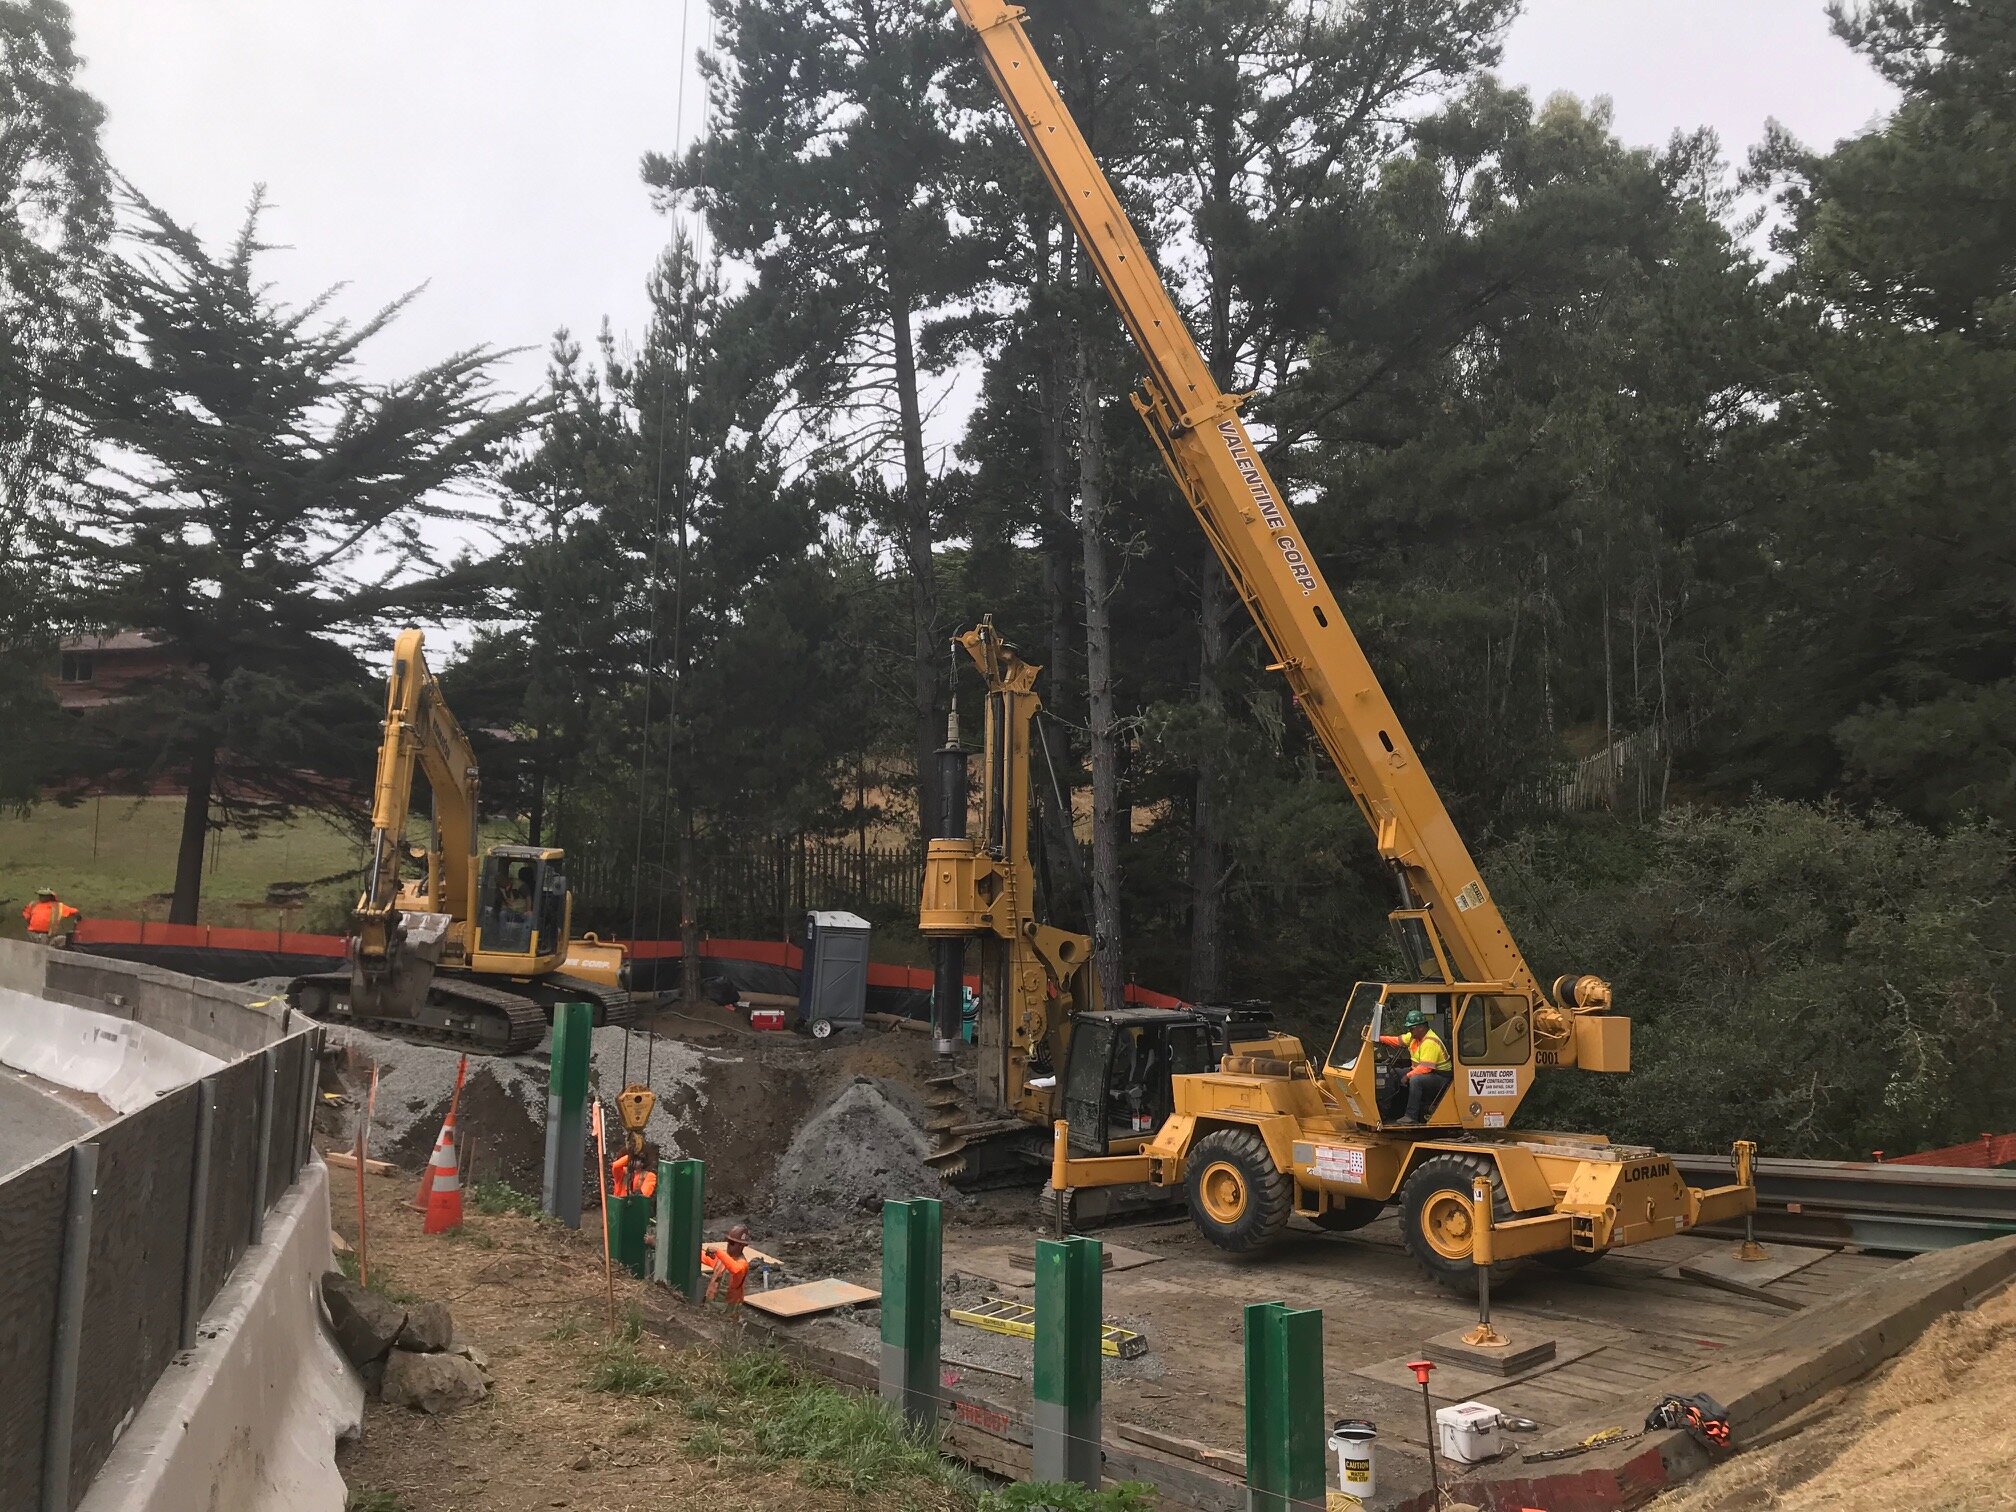   Welcome To Valentine Corporation   Project: Bodega Bay - Cal Trans  If It's Difficult Or Unusual, Call Us!   Contact Us  